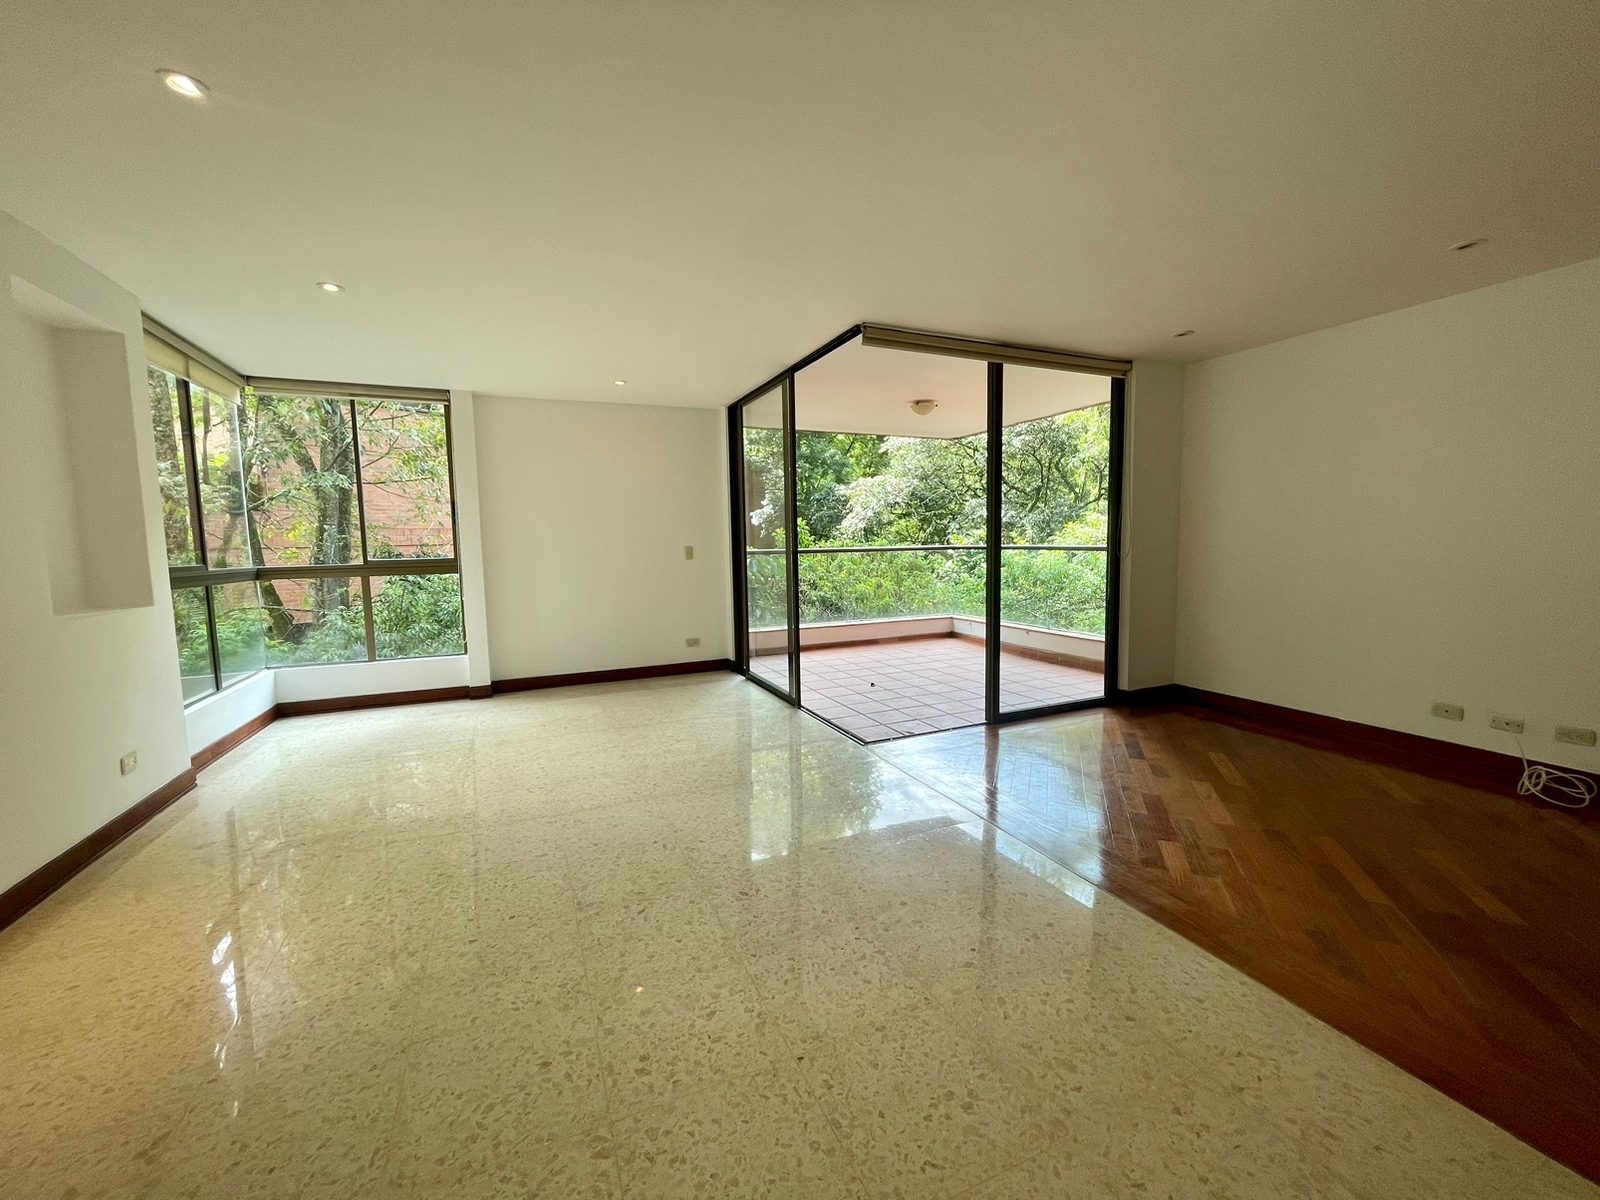 Quiet El Poblado Apartment with Large Balcony, Nice Hardwood Floors, Green Views and Two Pools